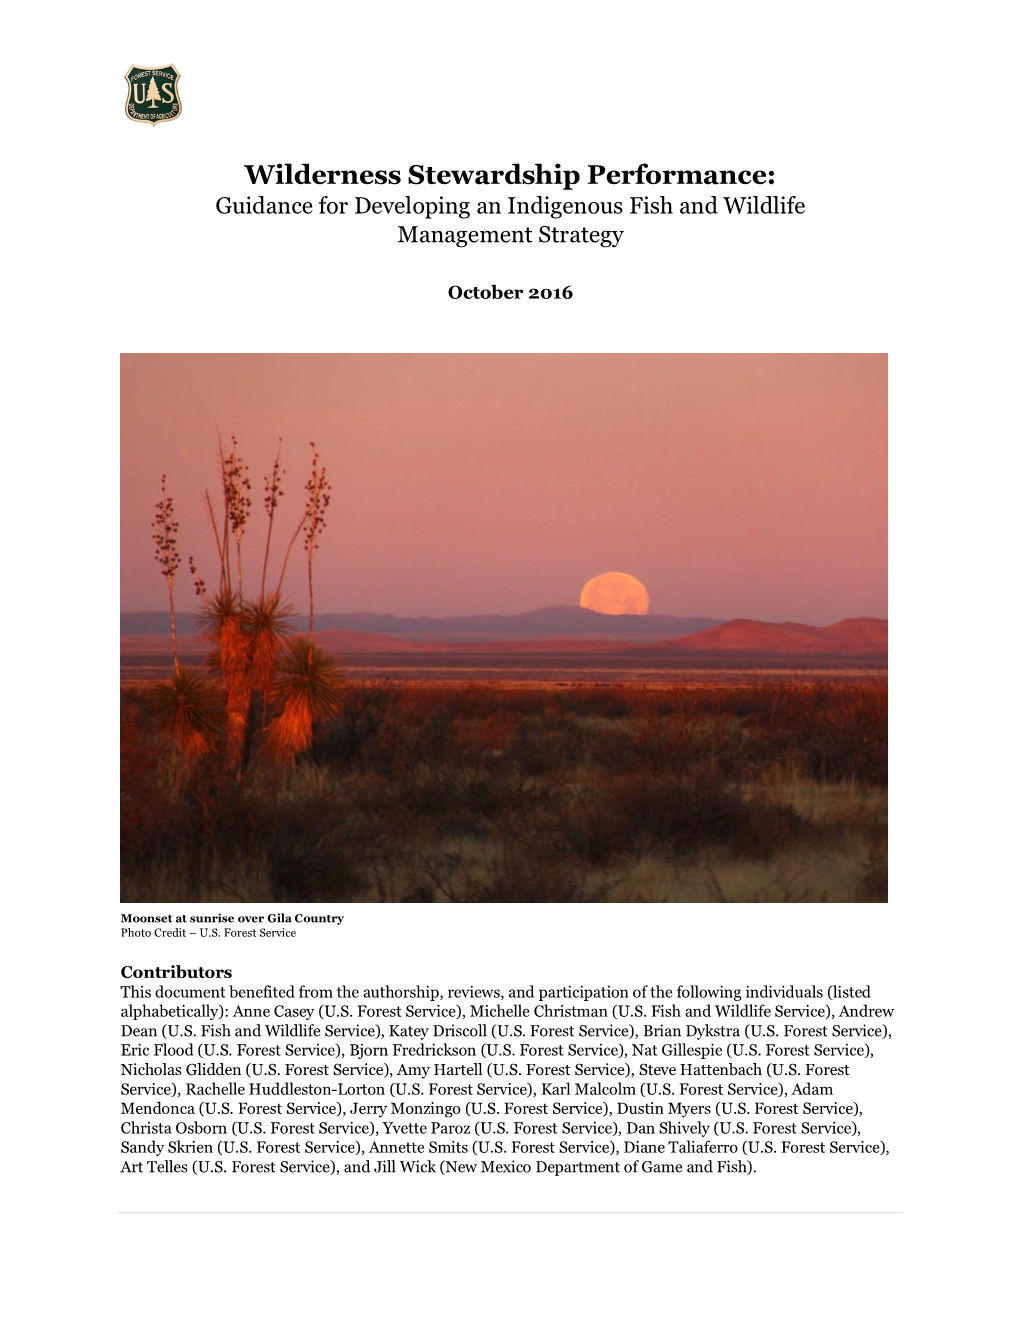 Wilderness Stewardship Performance: Guidance for Developing an Indigenous Fish and Wildlife Management Strategy